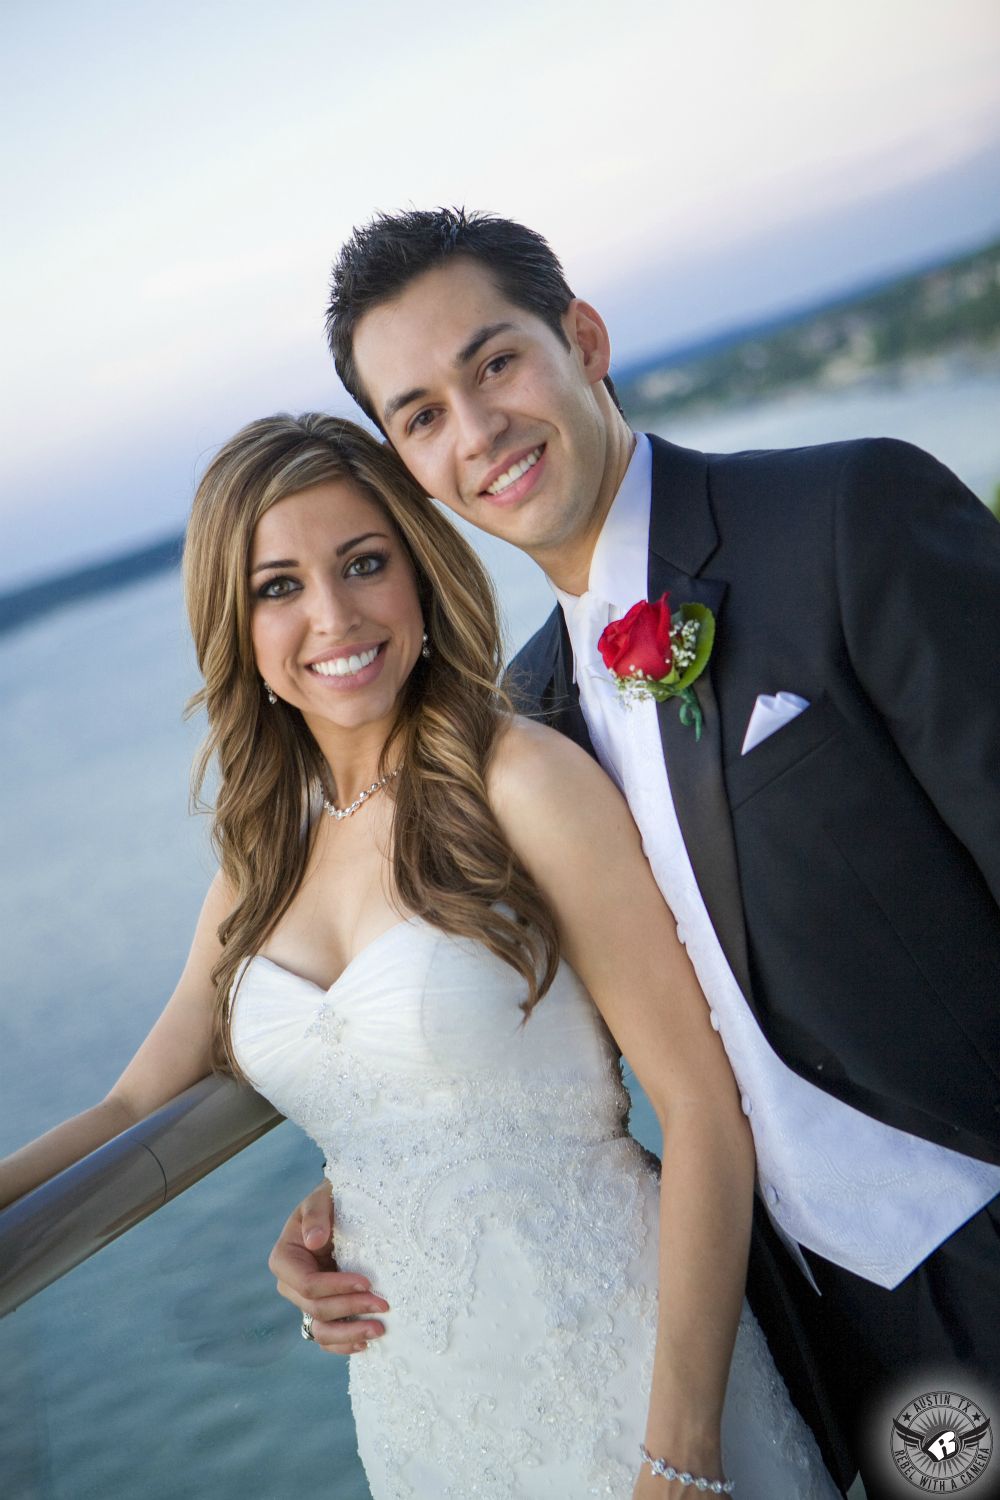 Very happy bride in strapless bridal gown and groom in black tuxedo with red rose boutonniere pose on the deck on their wedding day outside the Lakeway Resort and Spa Austin wedding venue.